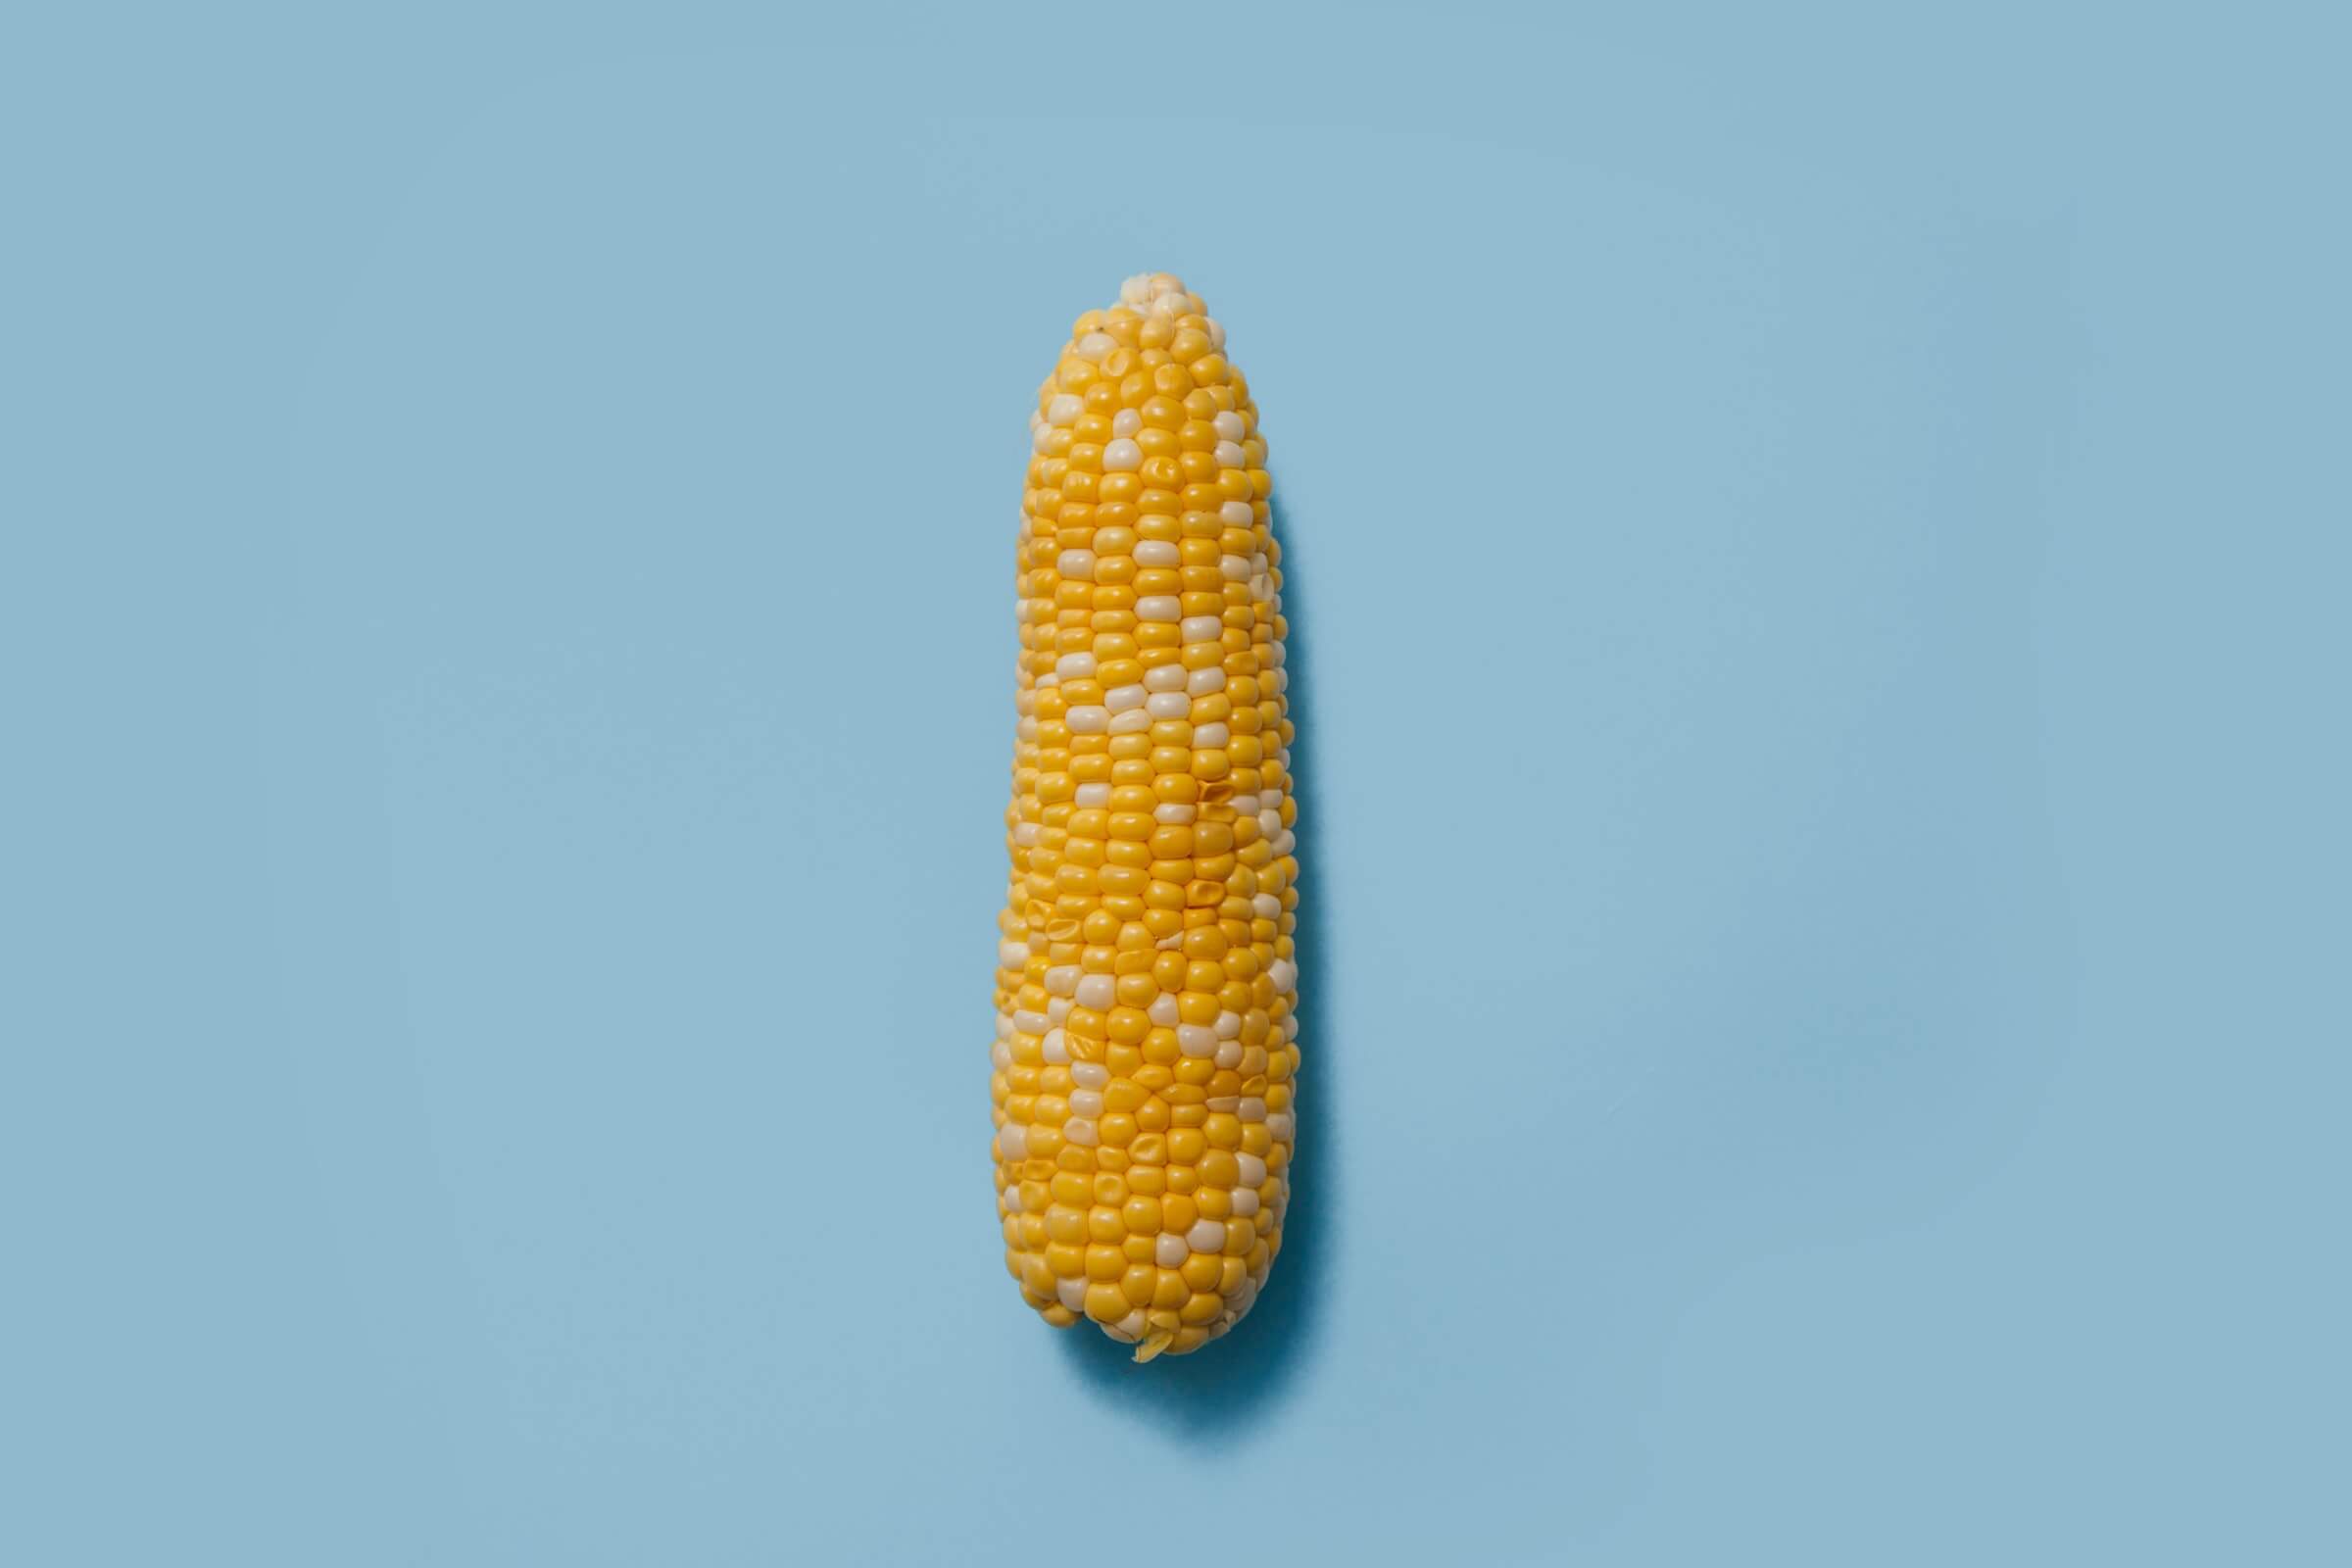 Corn is one of the most engineered plants humans cultivate